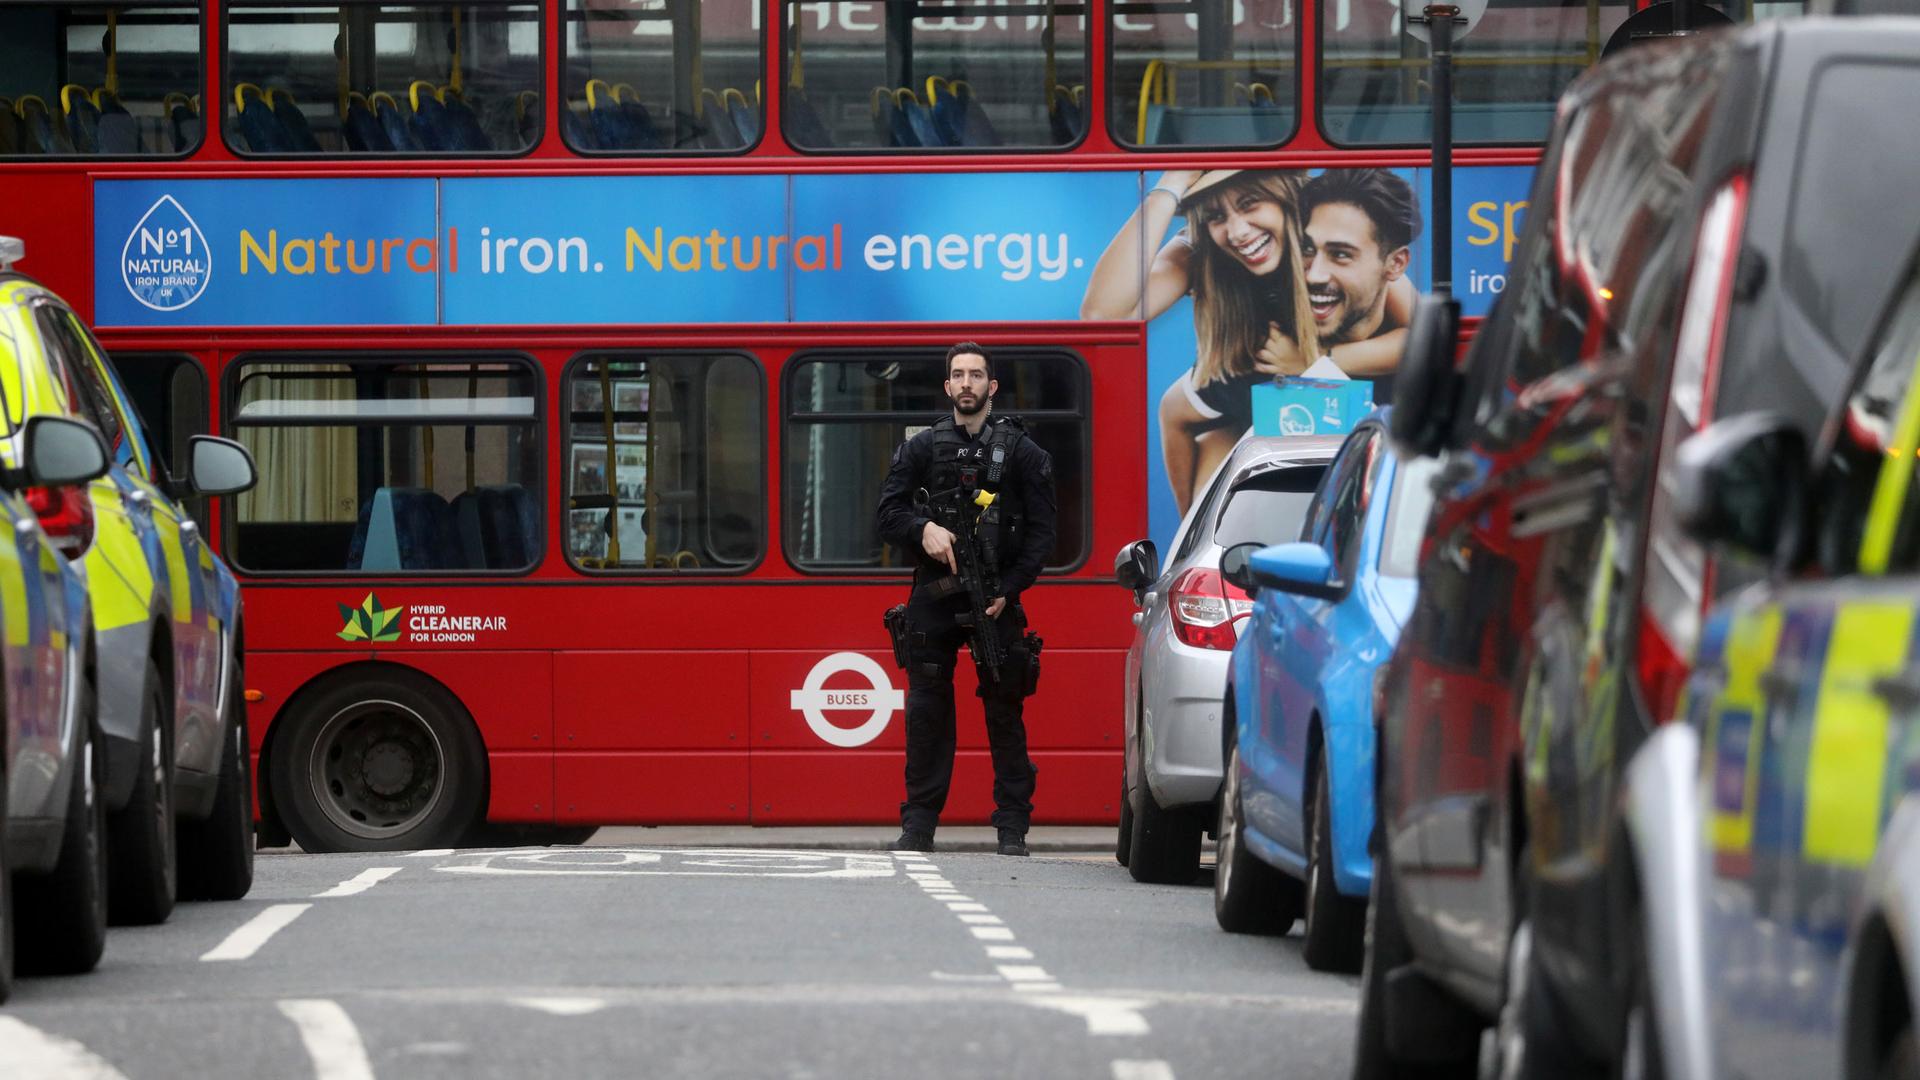 A police officer stands in front of a red London bus